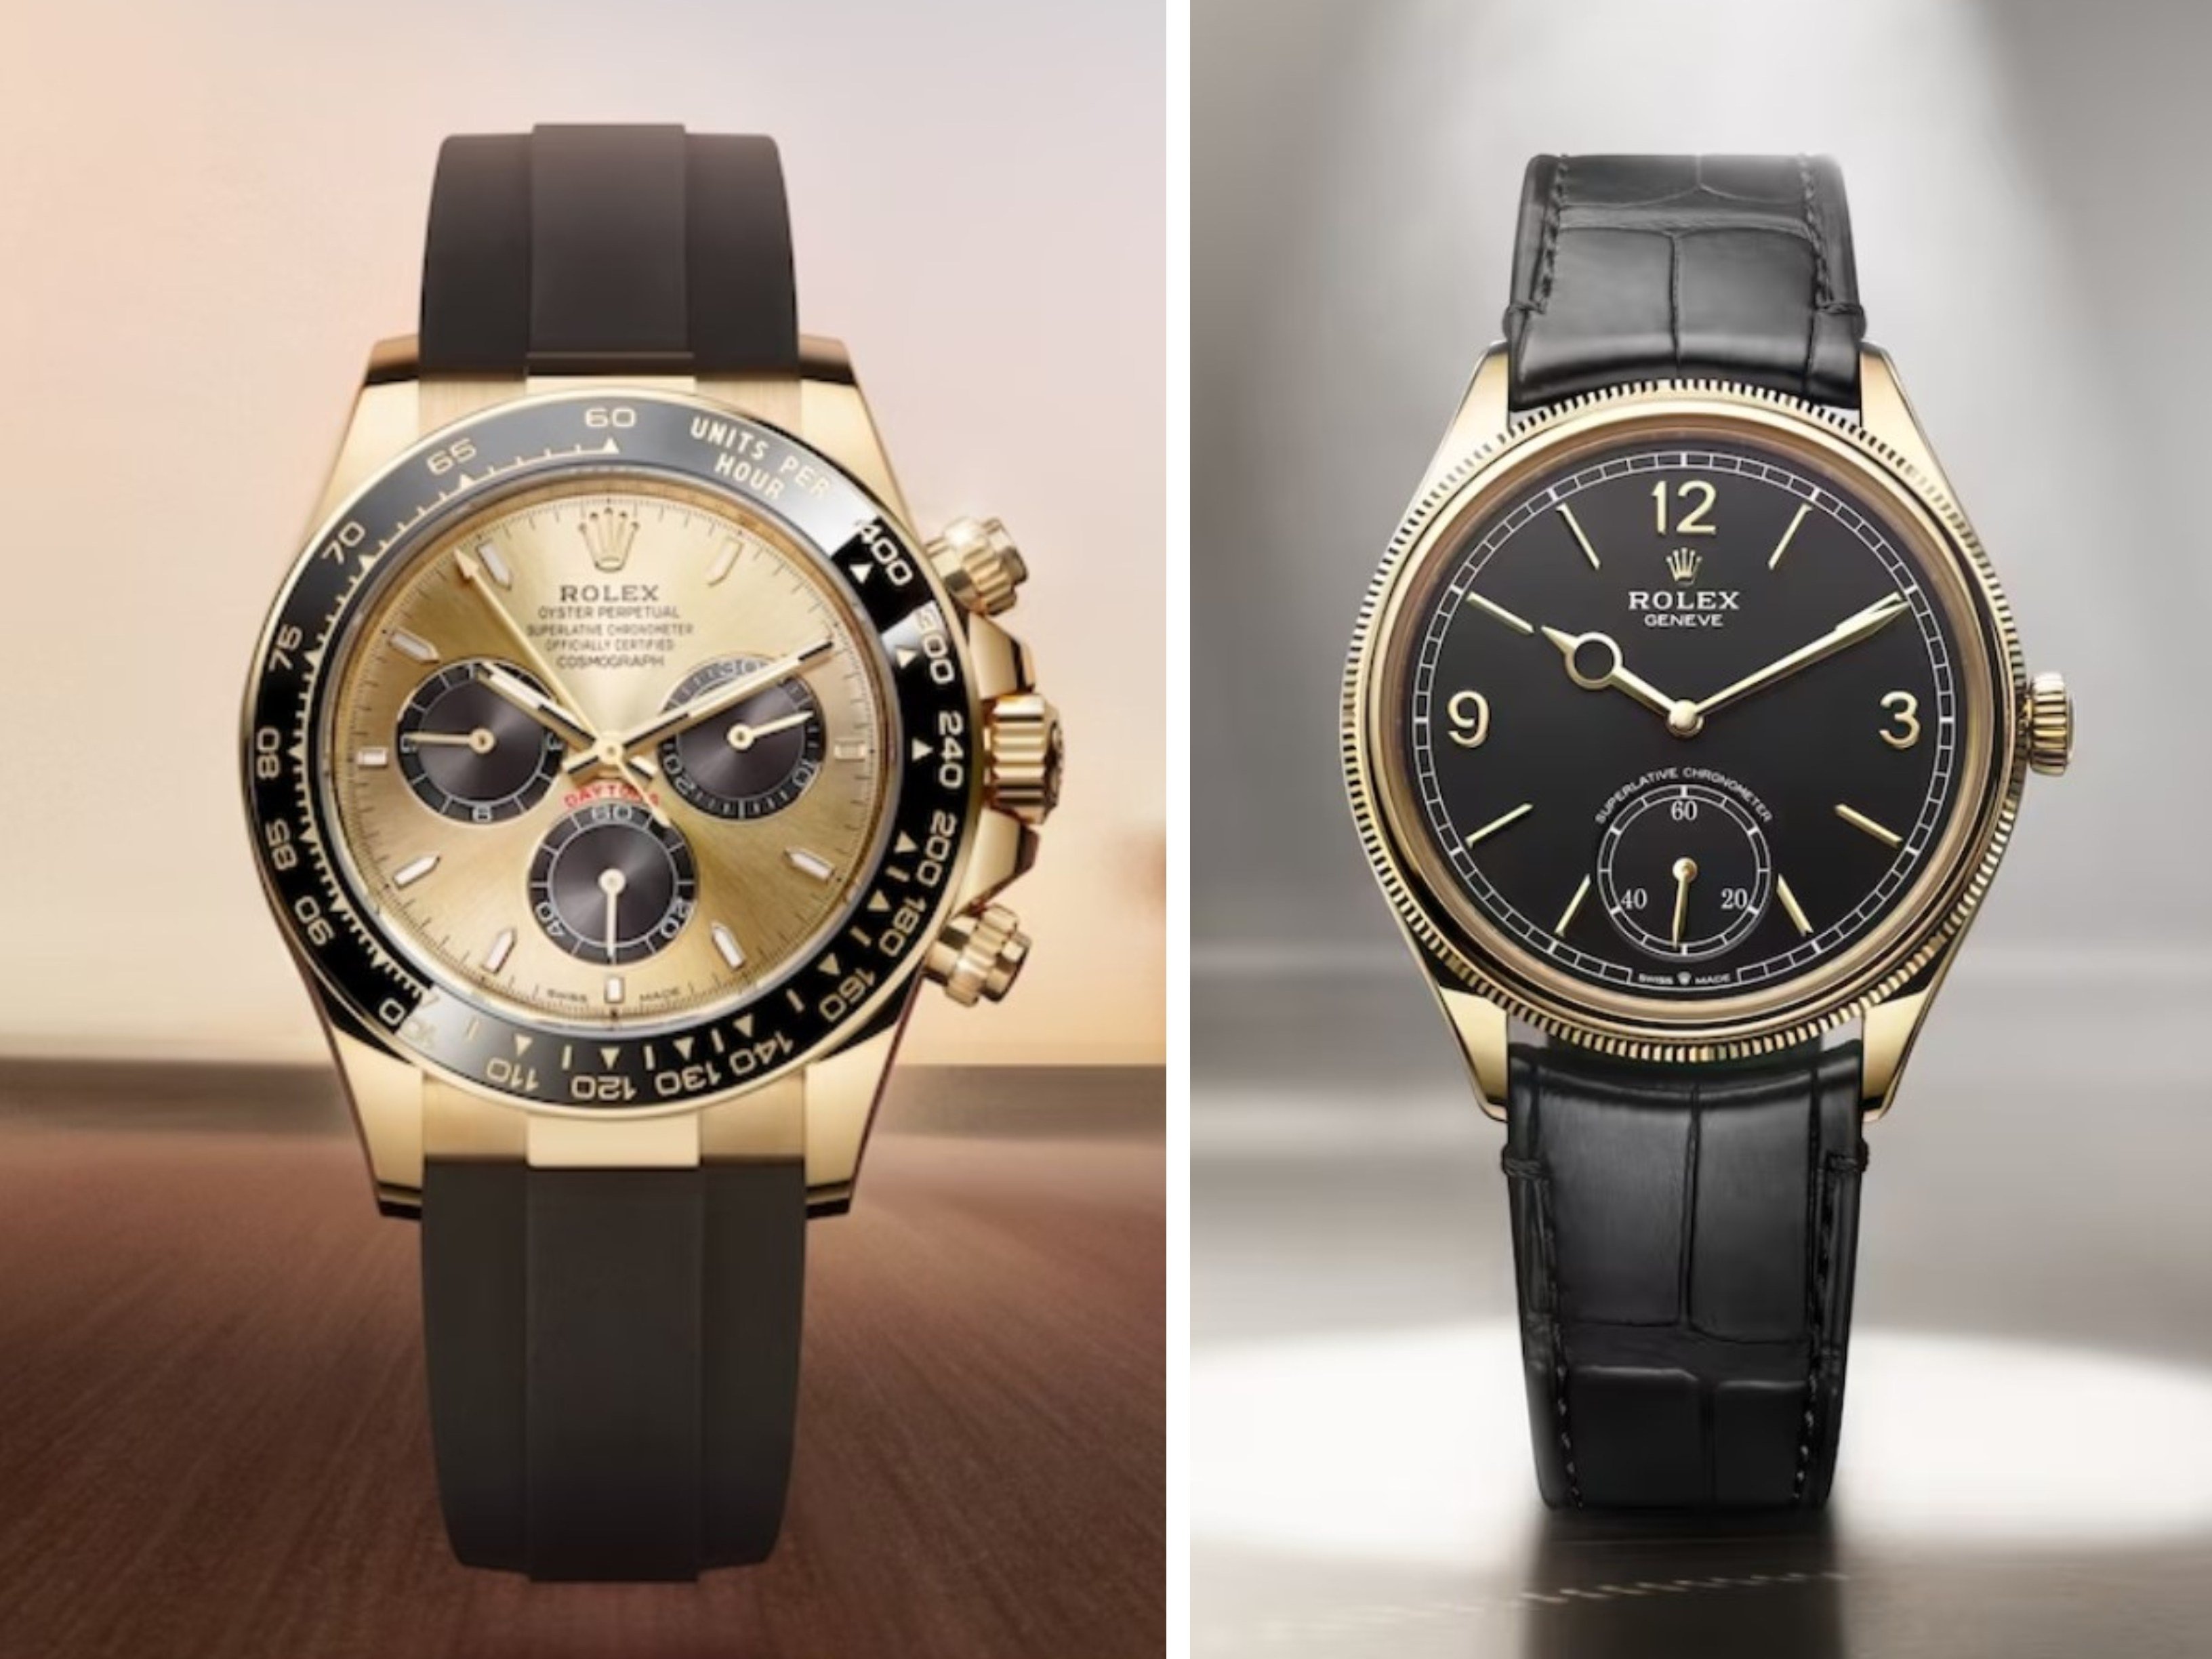 Tweaks were made to the Cosmograph Daytona (left) and Rolex also revealed an all-new watch called the Perpetual 1908 at Watches and Wonders 2023 in Geneva. Photos: Rolex